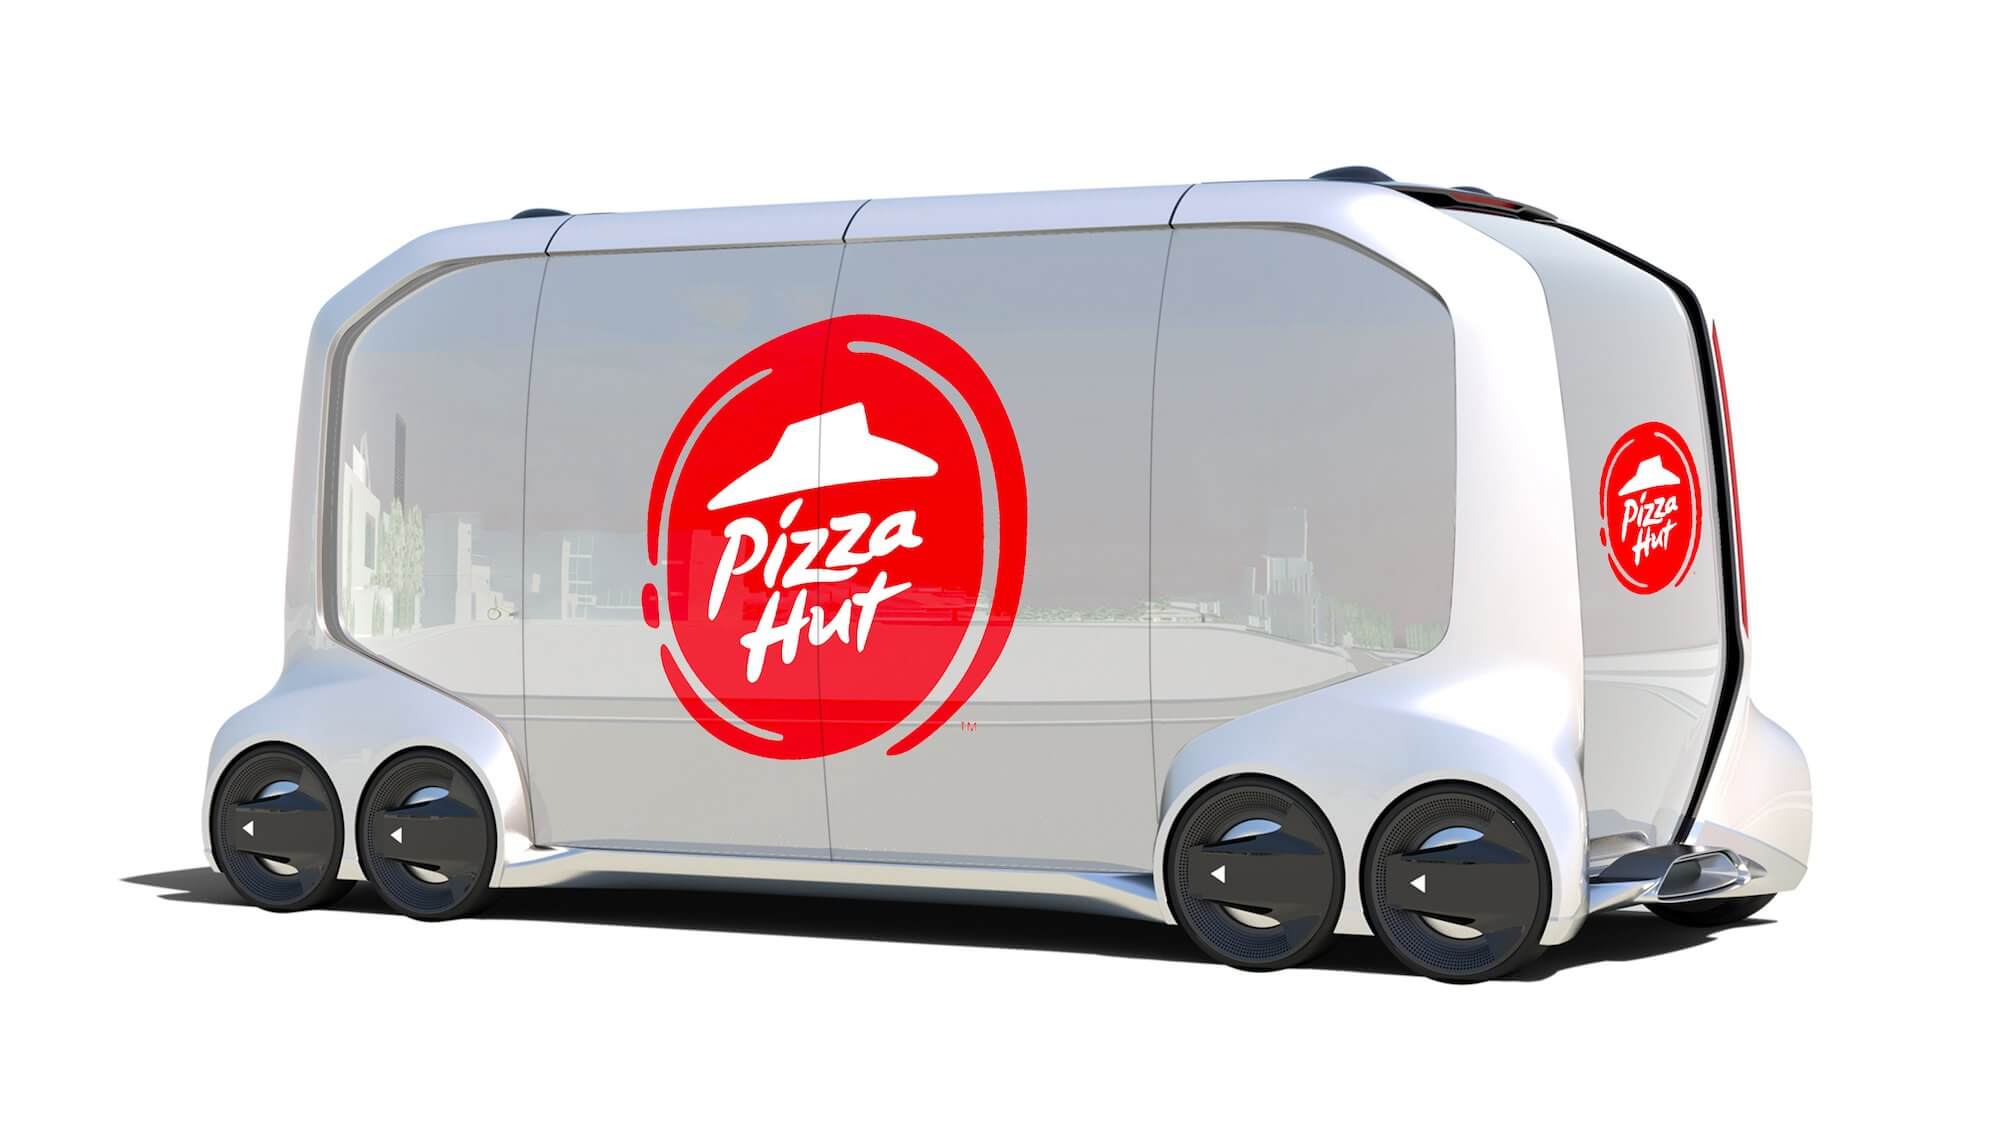 Pizza Hut claims autonomous delivery vehicles will create more jobs